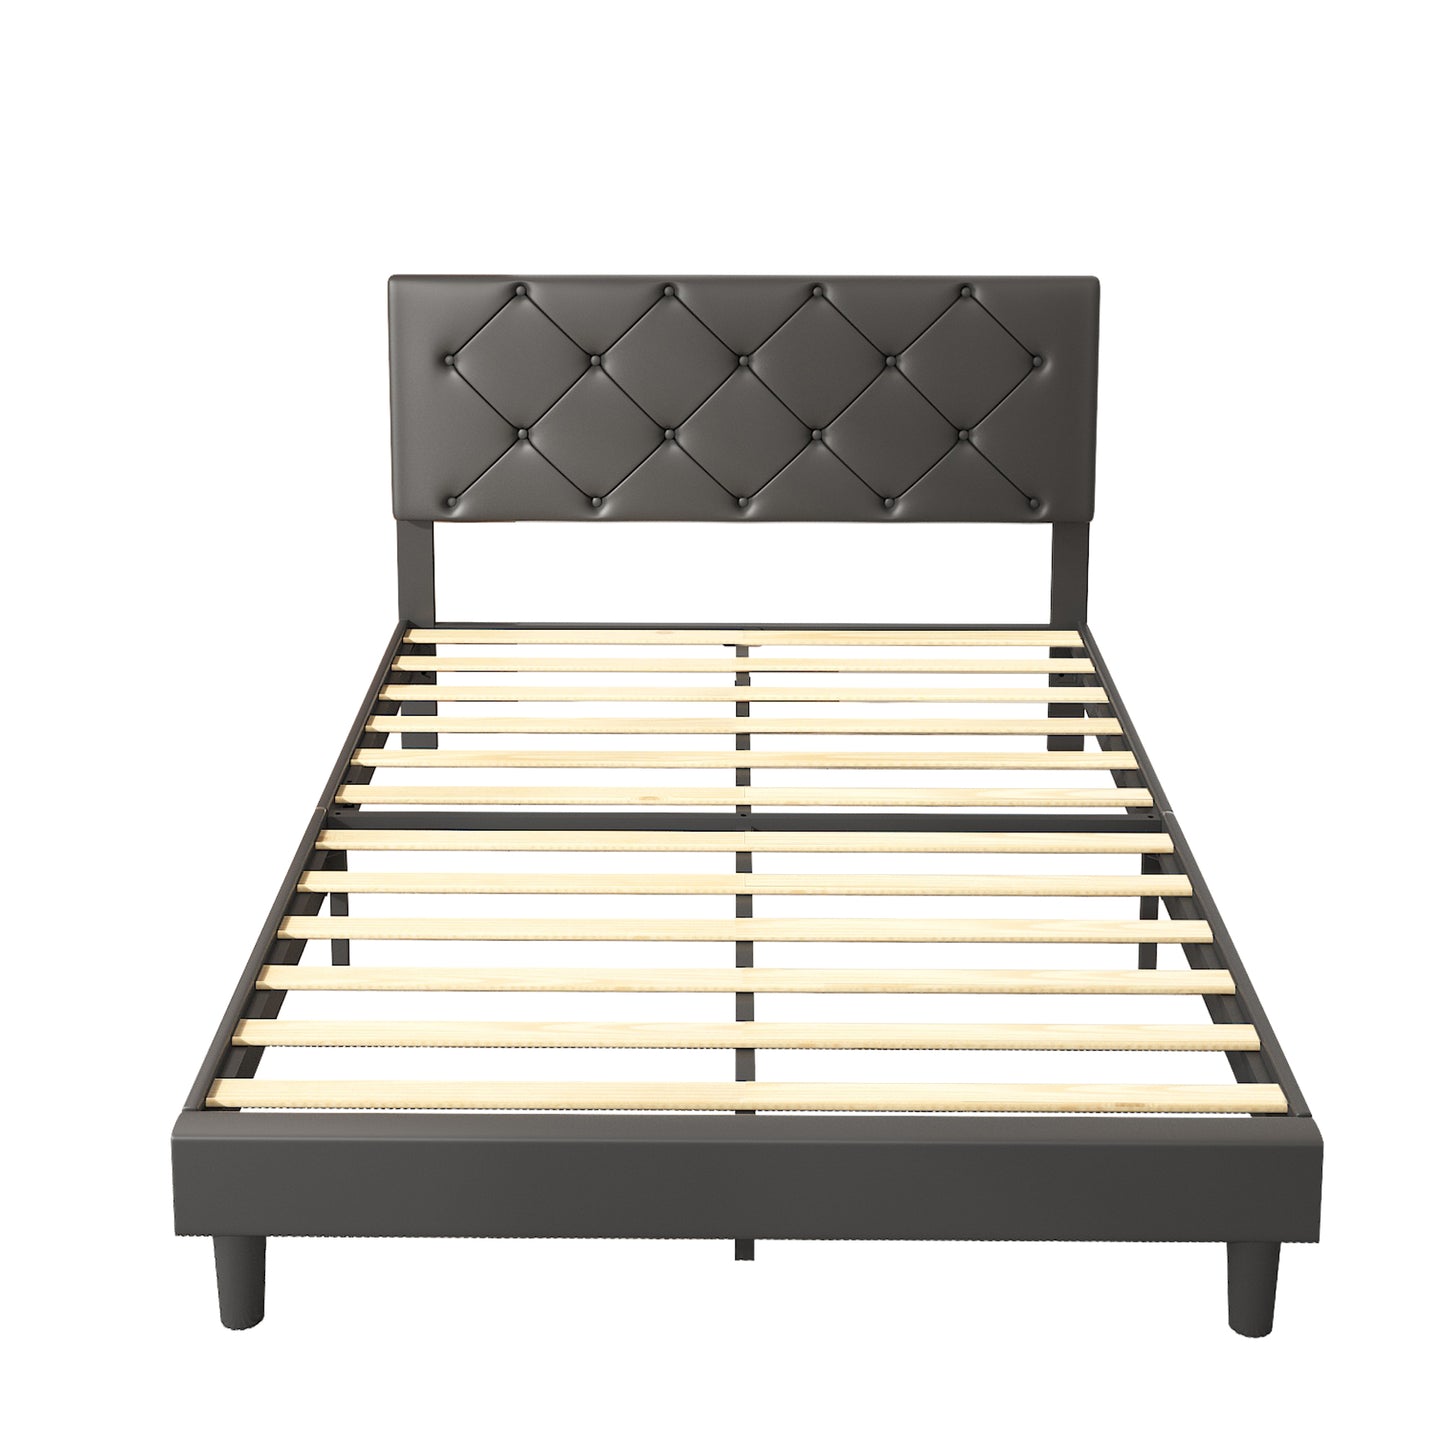 paproos Full Bed Frame, Upholstered Linen Fabric Platform Bed with Headboard, Strong Wooden Slats Support, No Box Spring Needed, Beige